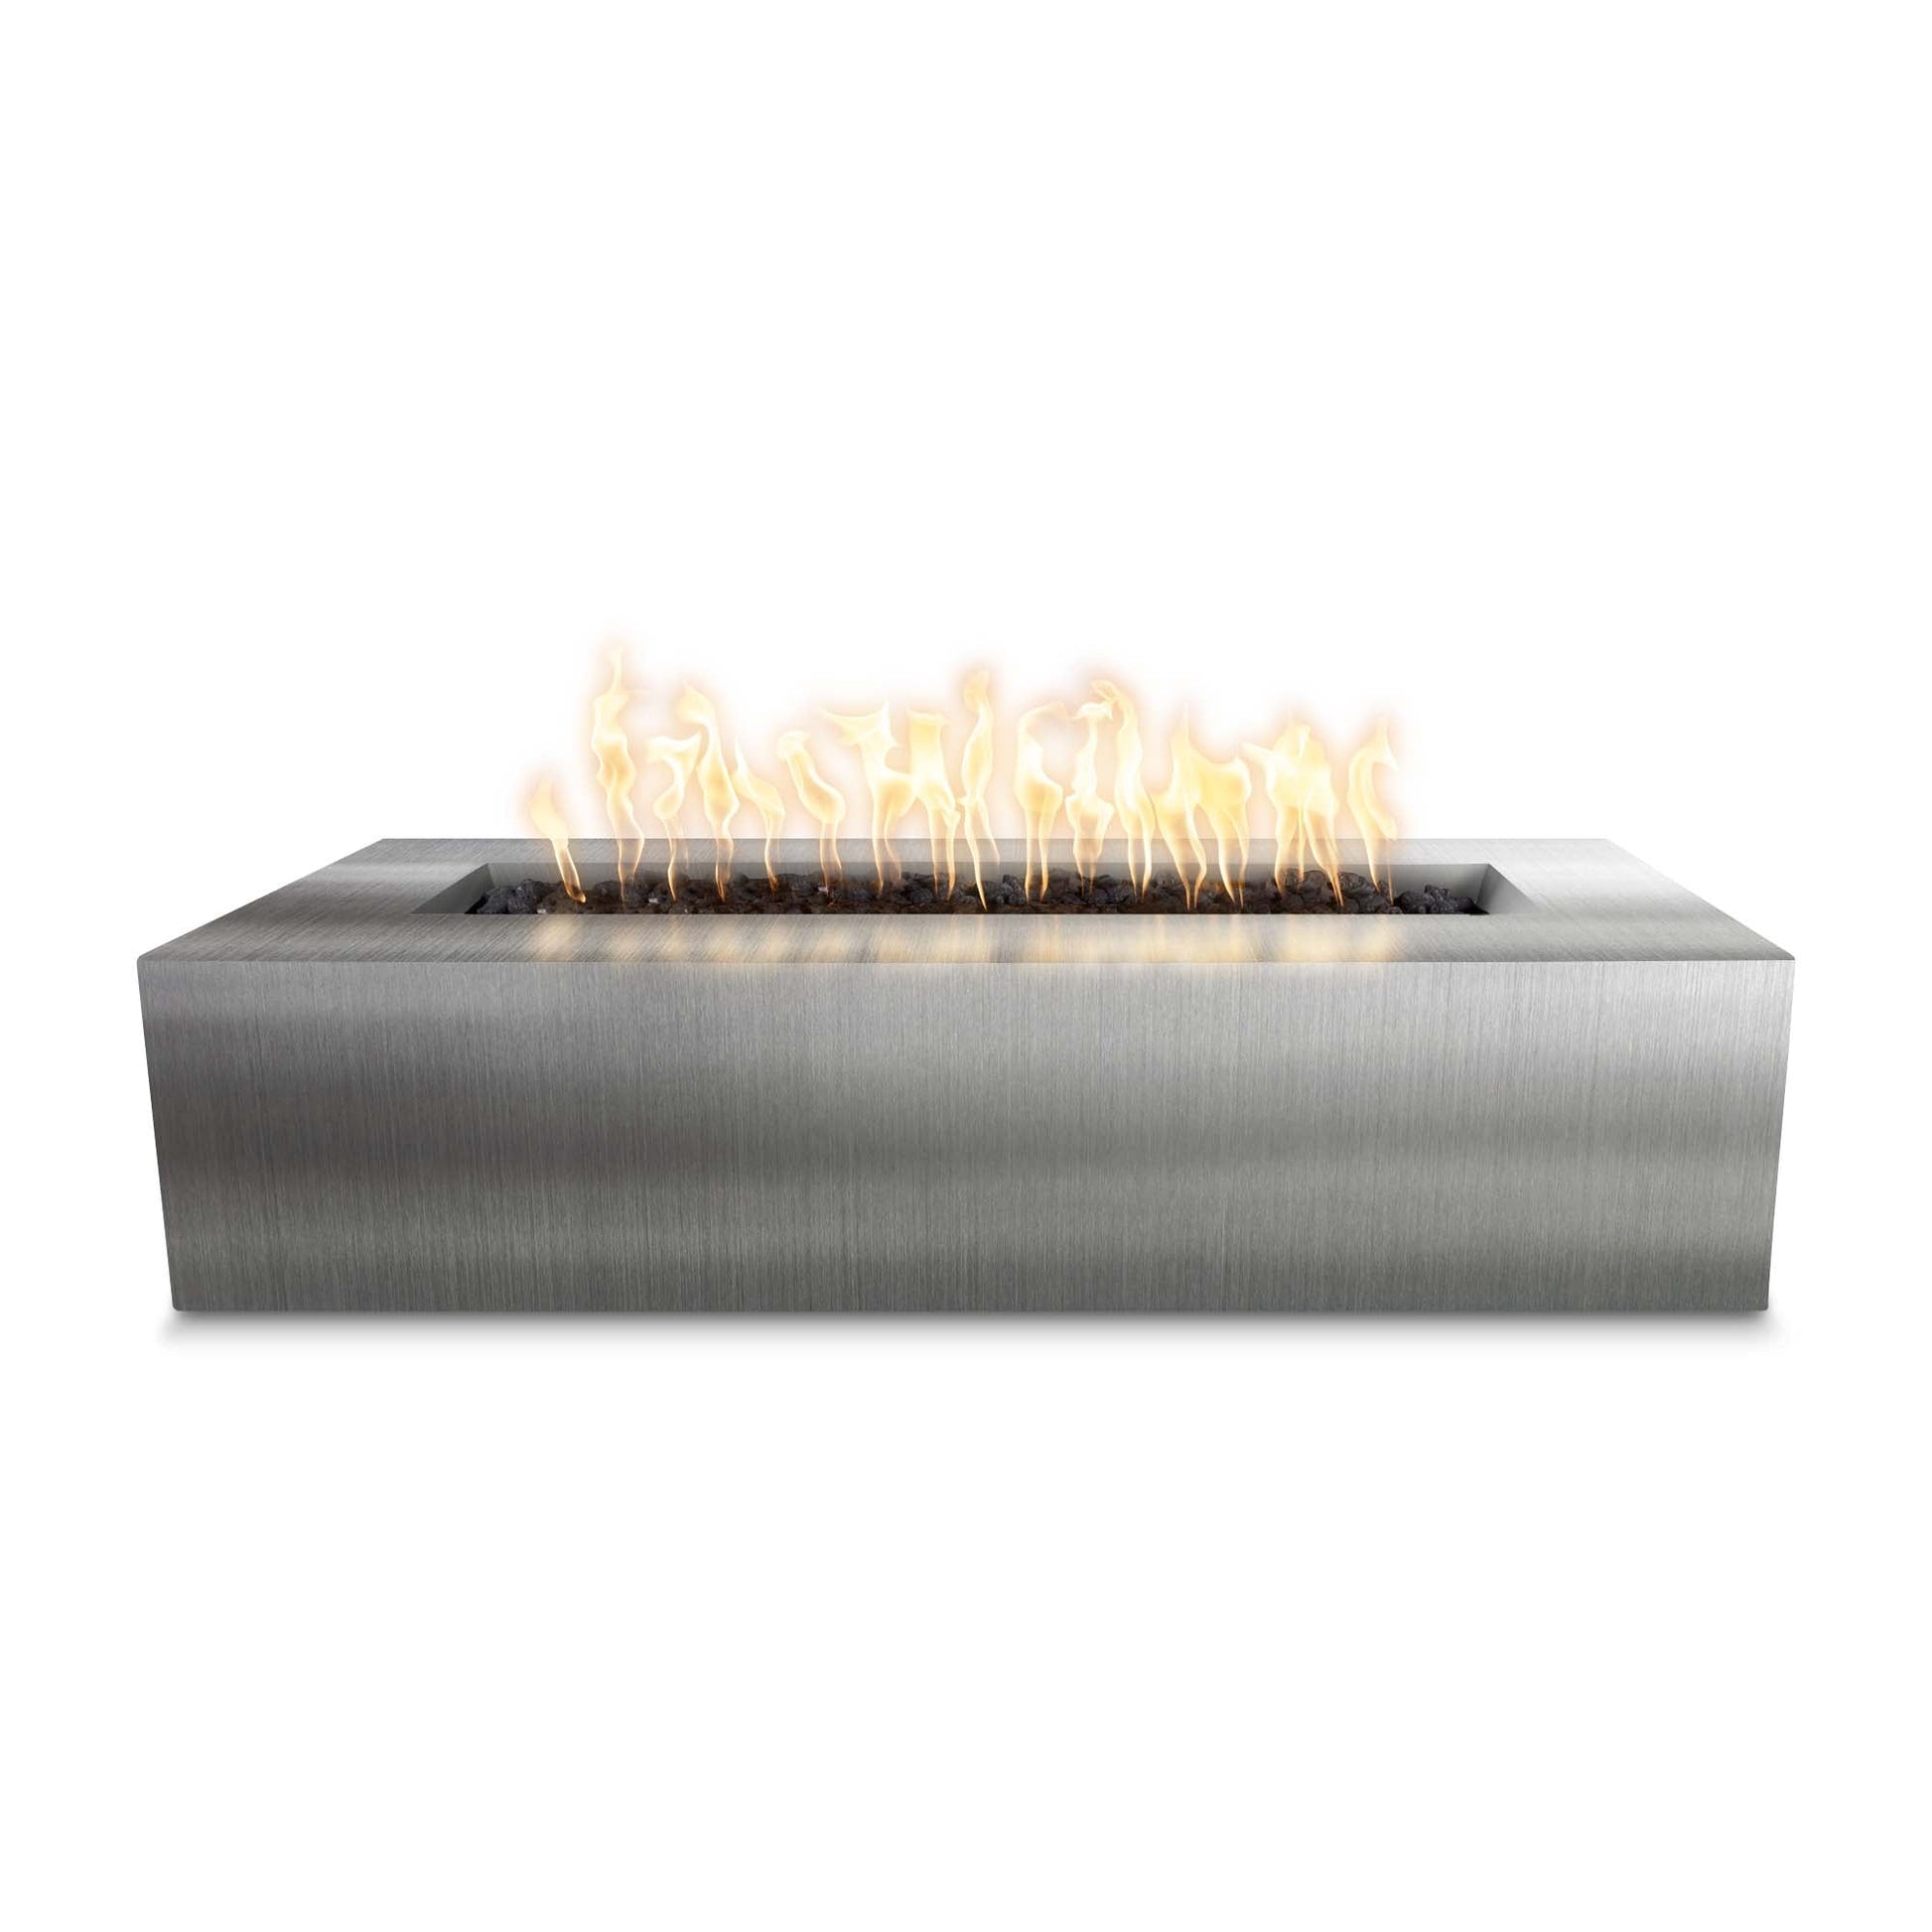 The Outdoor Plus Rectangular Regal 48" Corten Steel Natural Gas Fire Pit with 12V Electronic Ignition